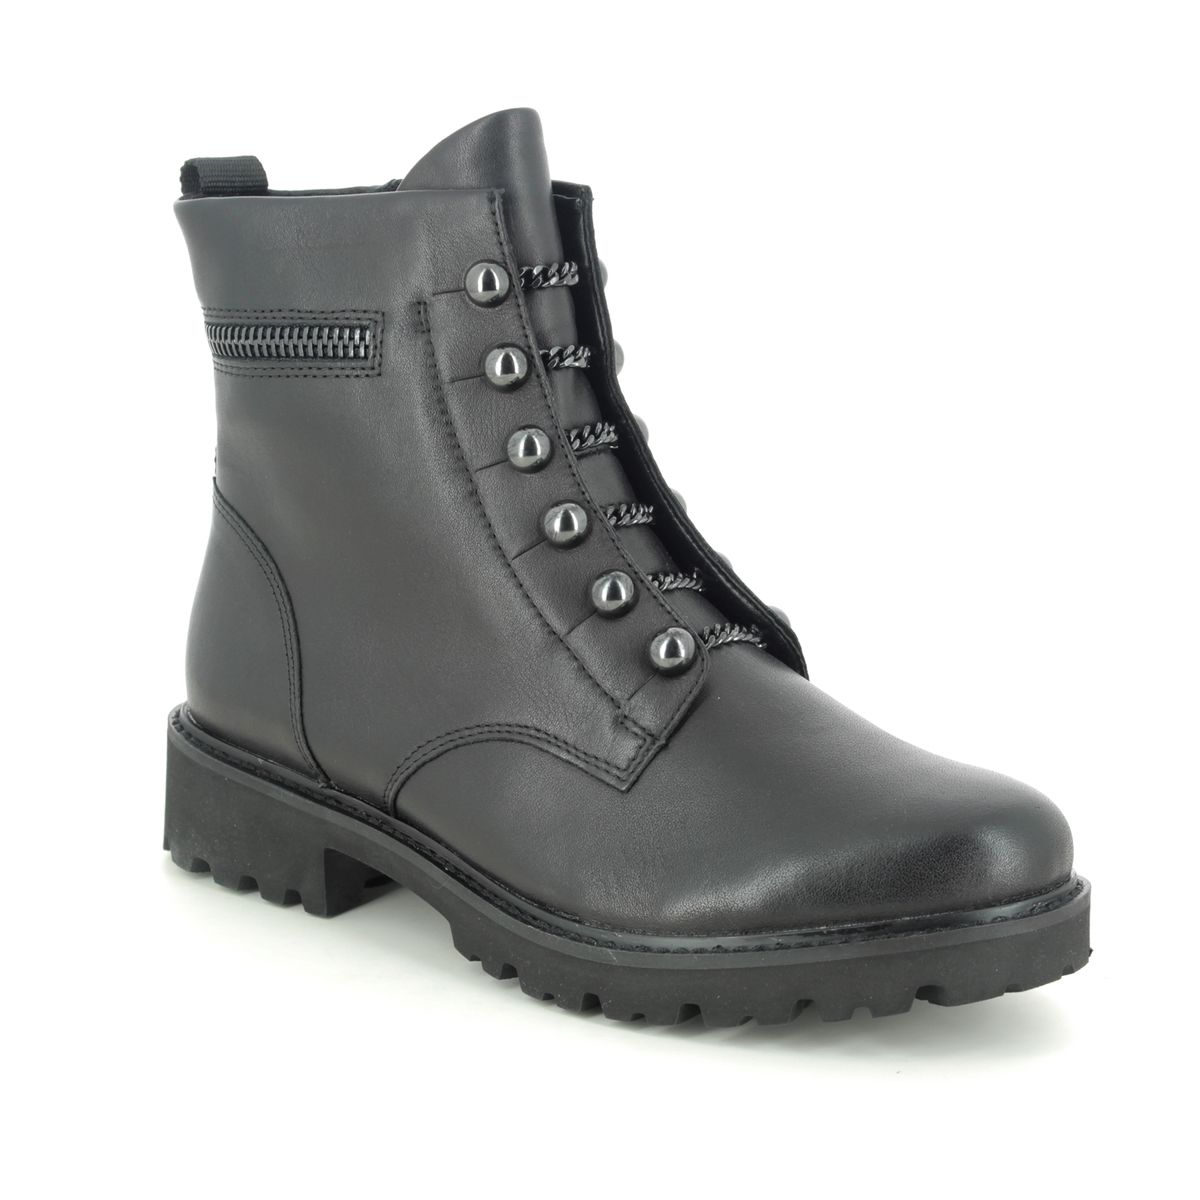 Remonte Docland Black Leather Womens Biker Boots D8670-01 In Size 38 In Plain Black Leather